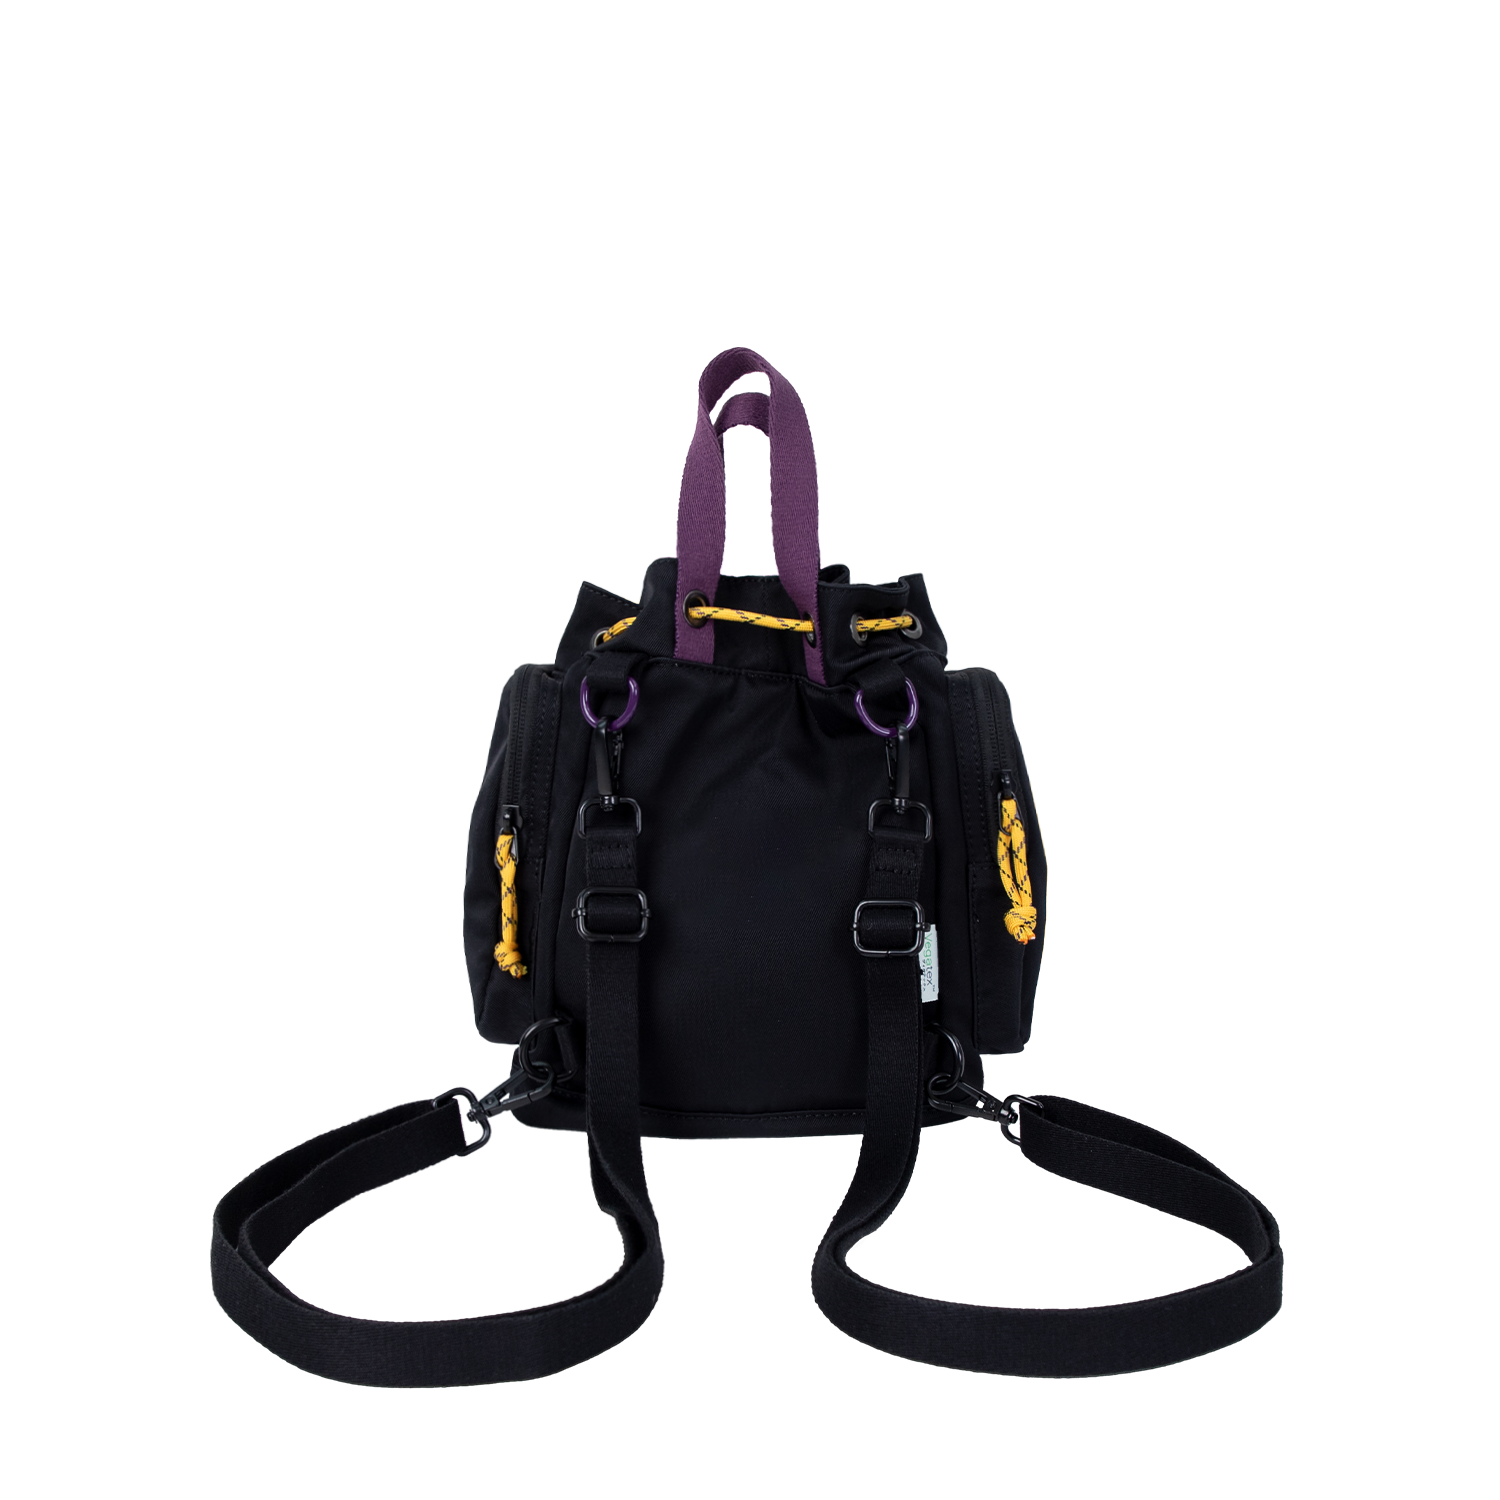 Pyramid Tiny Happy Camper Series Backpack